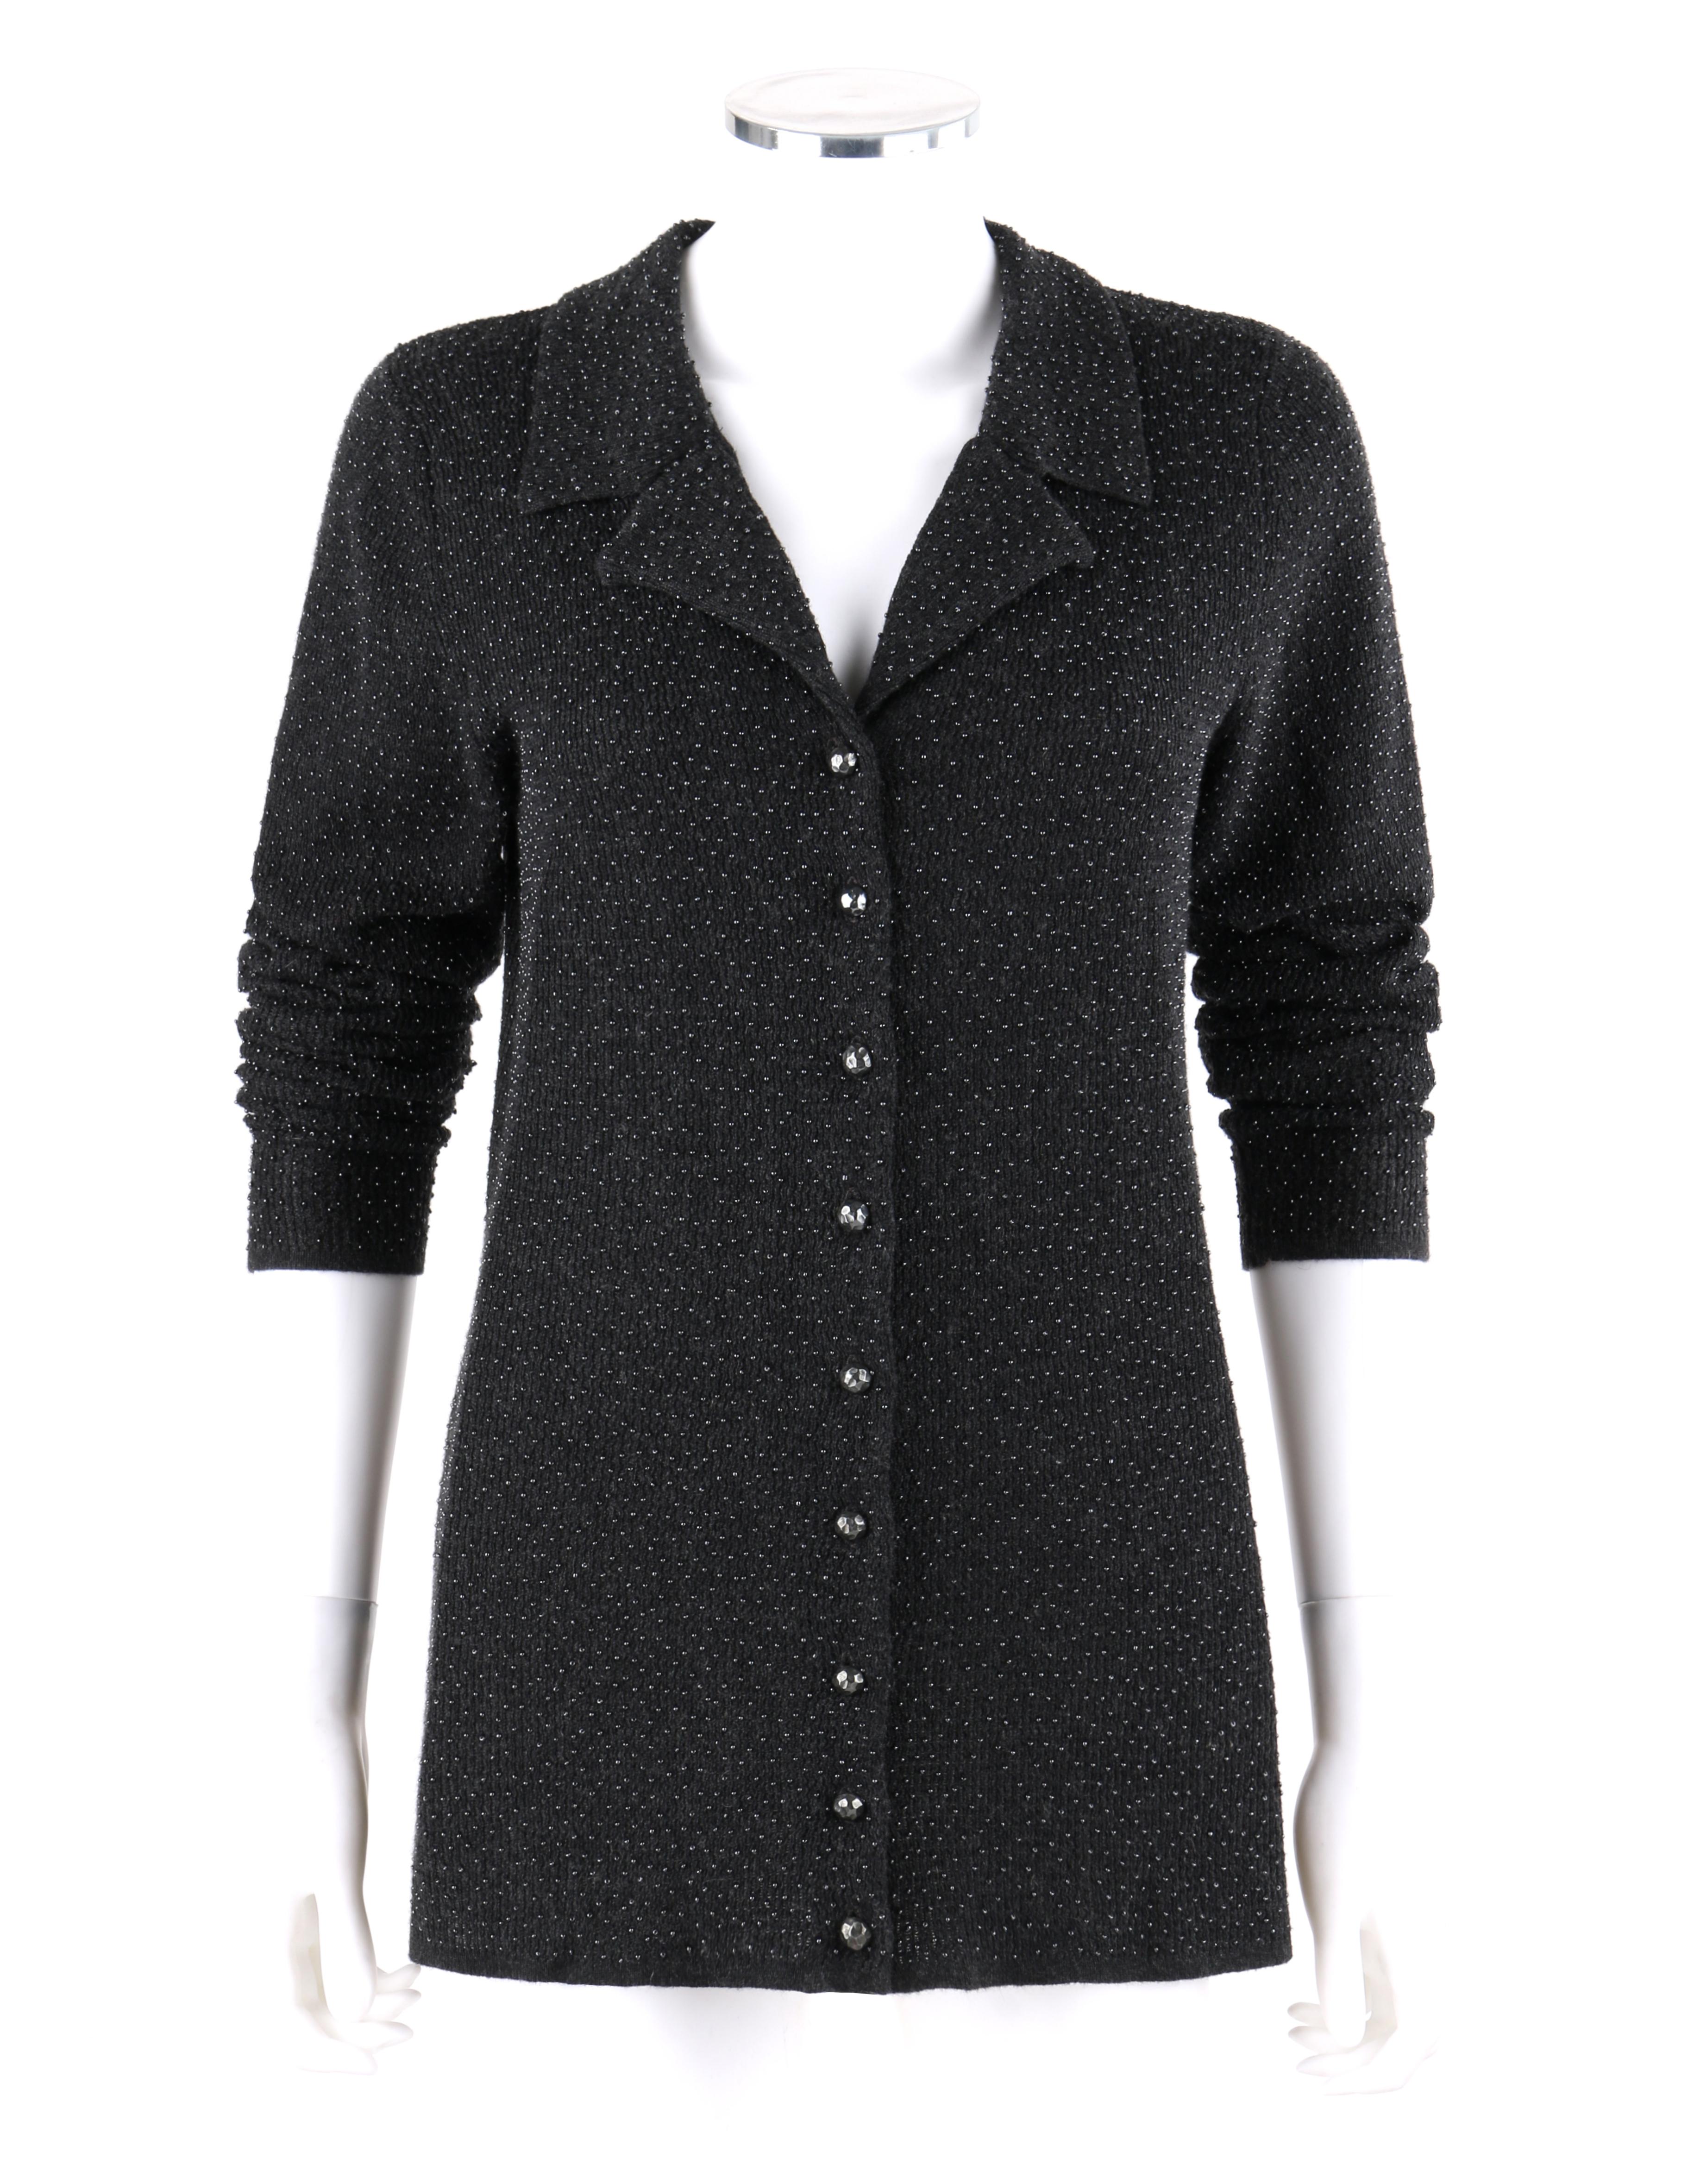 YVES SAINT LAURENT Rive Gauche Dark Gray Bead Embellished Silk Cashmere Button Front Cardigan Sweater
 
Circa: 1980’s
Label(s): Yves Saint Laurent / Rive Gauche 
Style: Cardigan
Color(s): Gray
Lined: No
Marked Fabric Content: 55% Silk; 45% Cashmere 